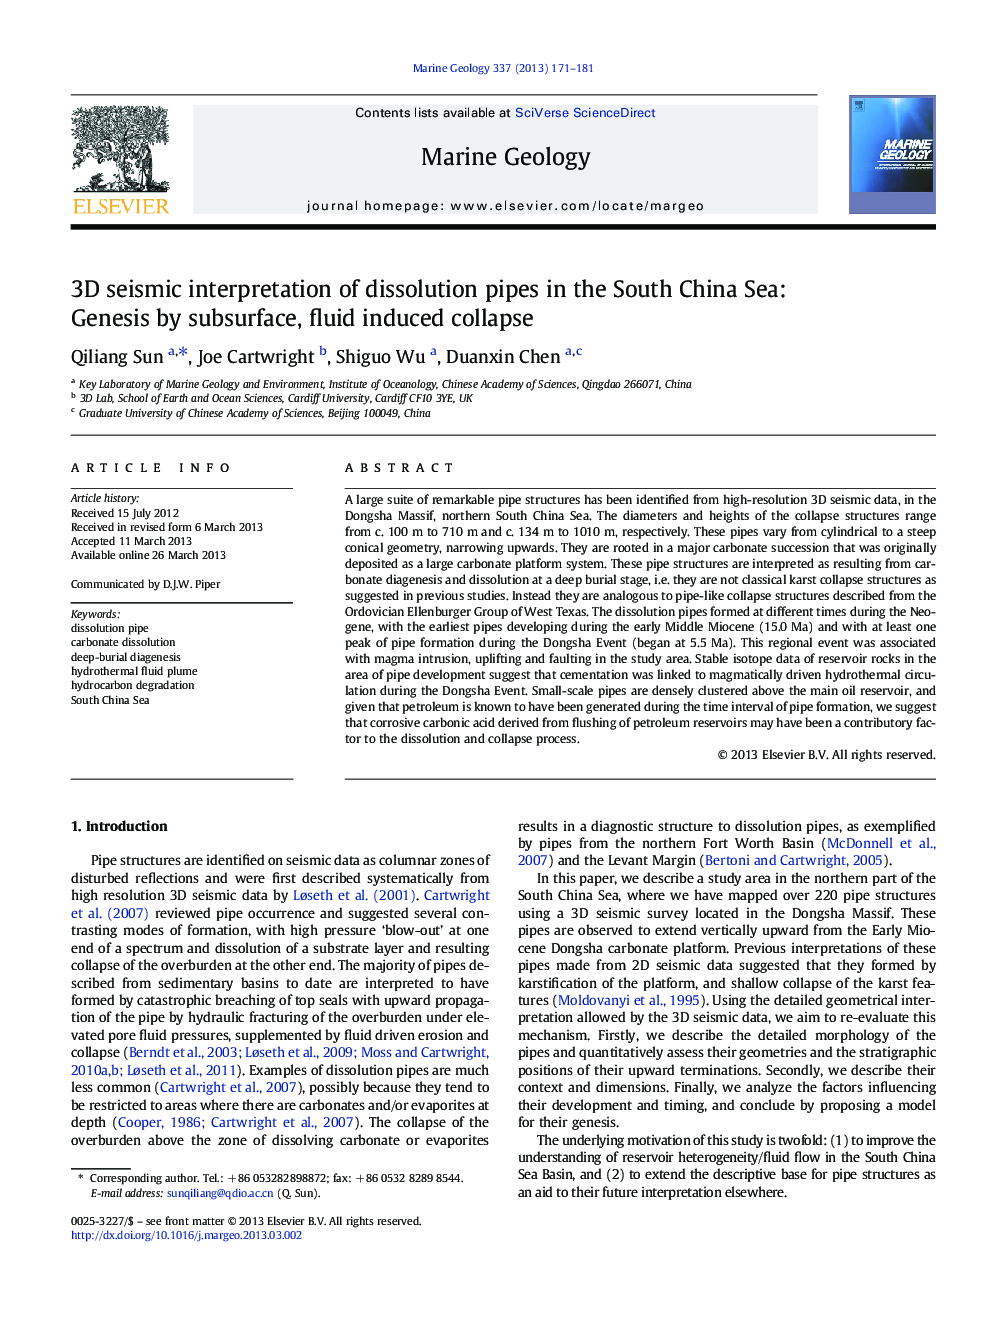 3D seismic interpretation of dissolution pipes in the South China Sea: Genesis by subsurface, fluid induced collapse